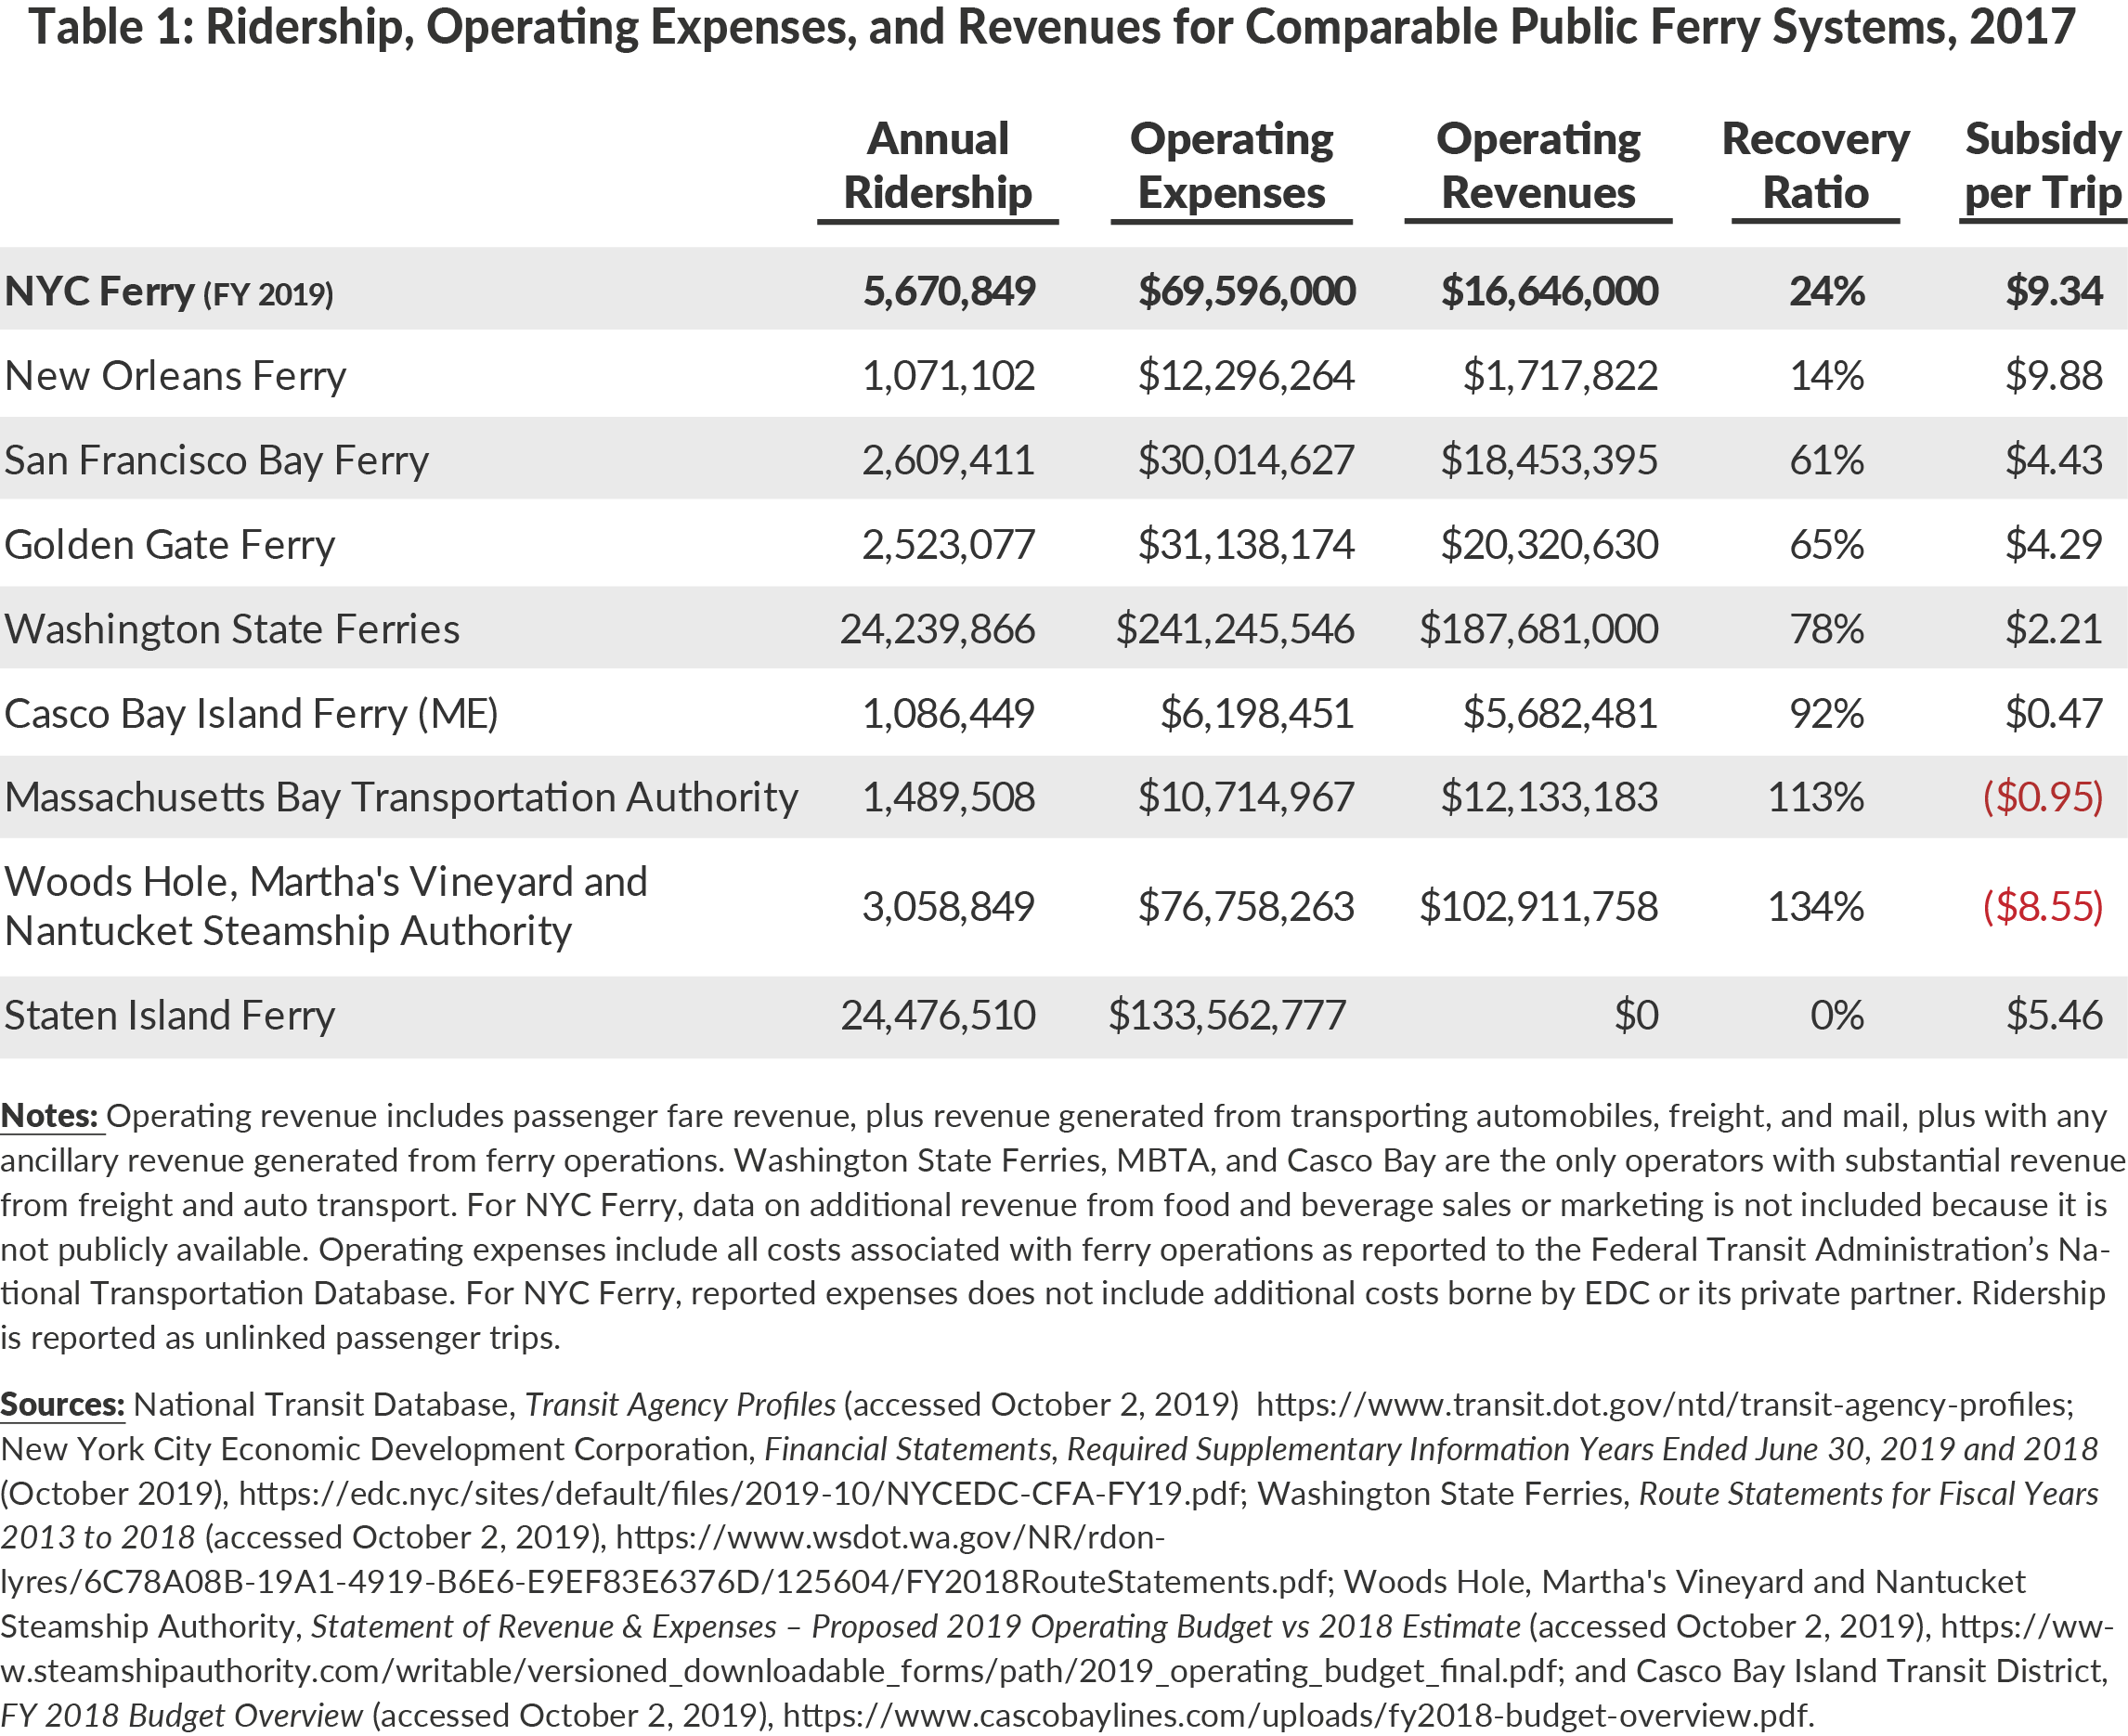 Table 1: Ridership, Operating Expenses, and Revenues for Comparable Public Ferry Systems, 2017